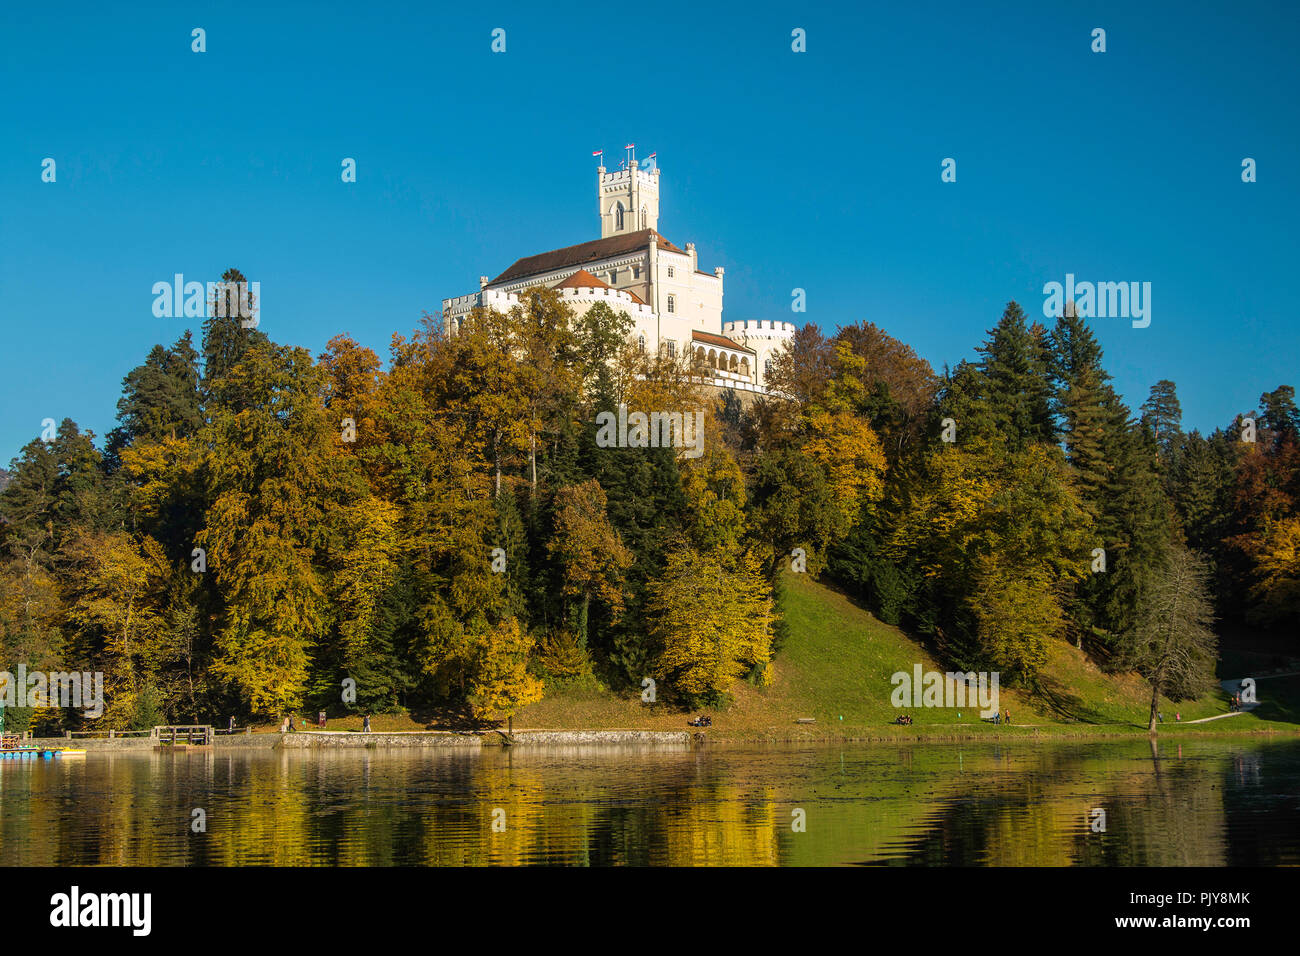 Castle of Trakoscan on the hill in autumn, Zagorje, Croatia, reflection on the lake Stock Photo